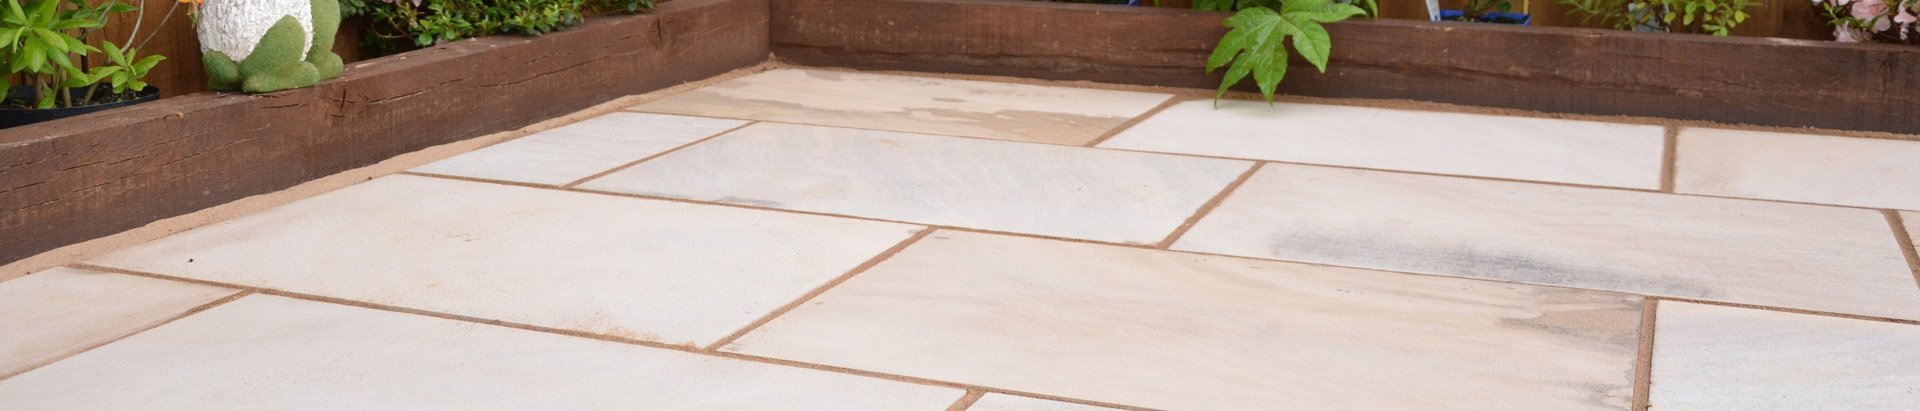 our natural stone collection